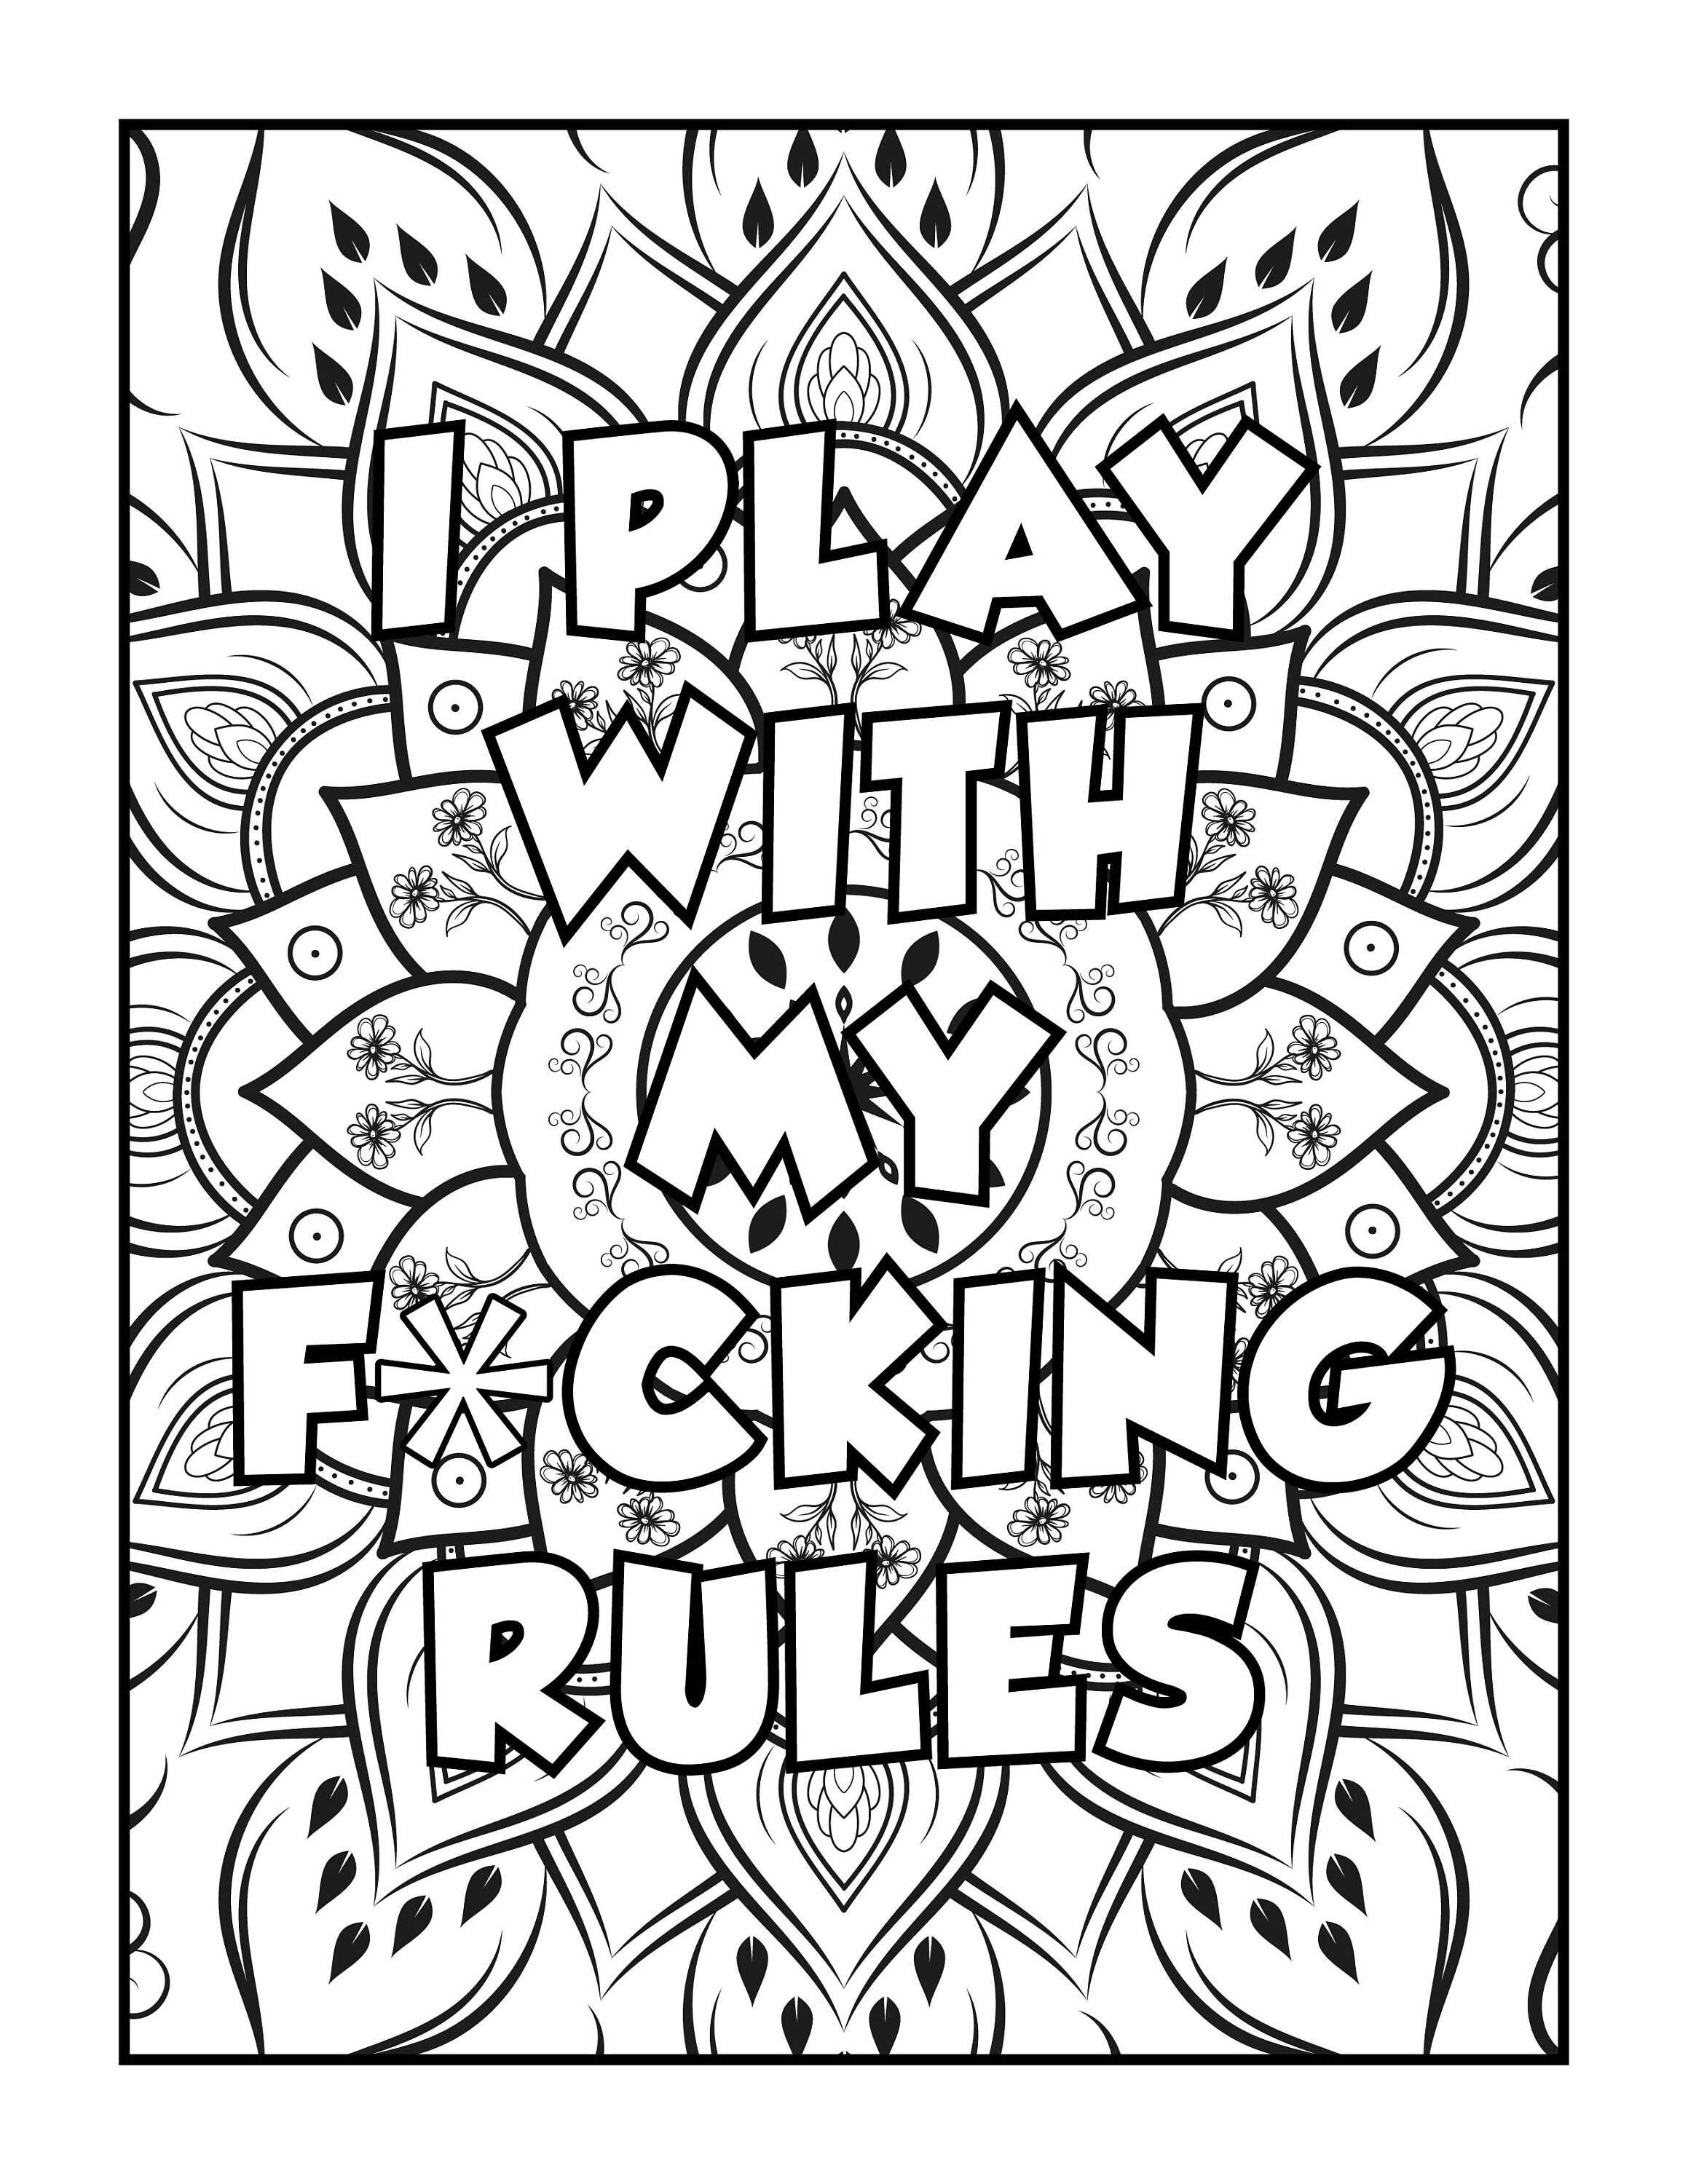 Swear Word Coloring Book For Adults: Go Fuck Yourself I'm Coloring:  Motivational Swear Words Coloring Book for Adults: Swearing Colouring Book  Pages for Stress.. Funny Adult Coloring Books) by Alesia Coloring Press